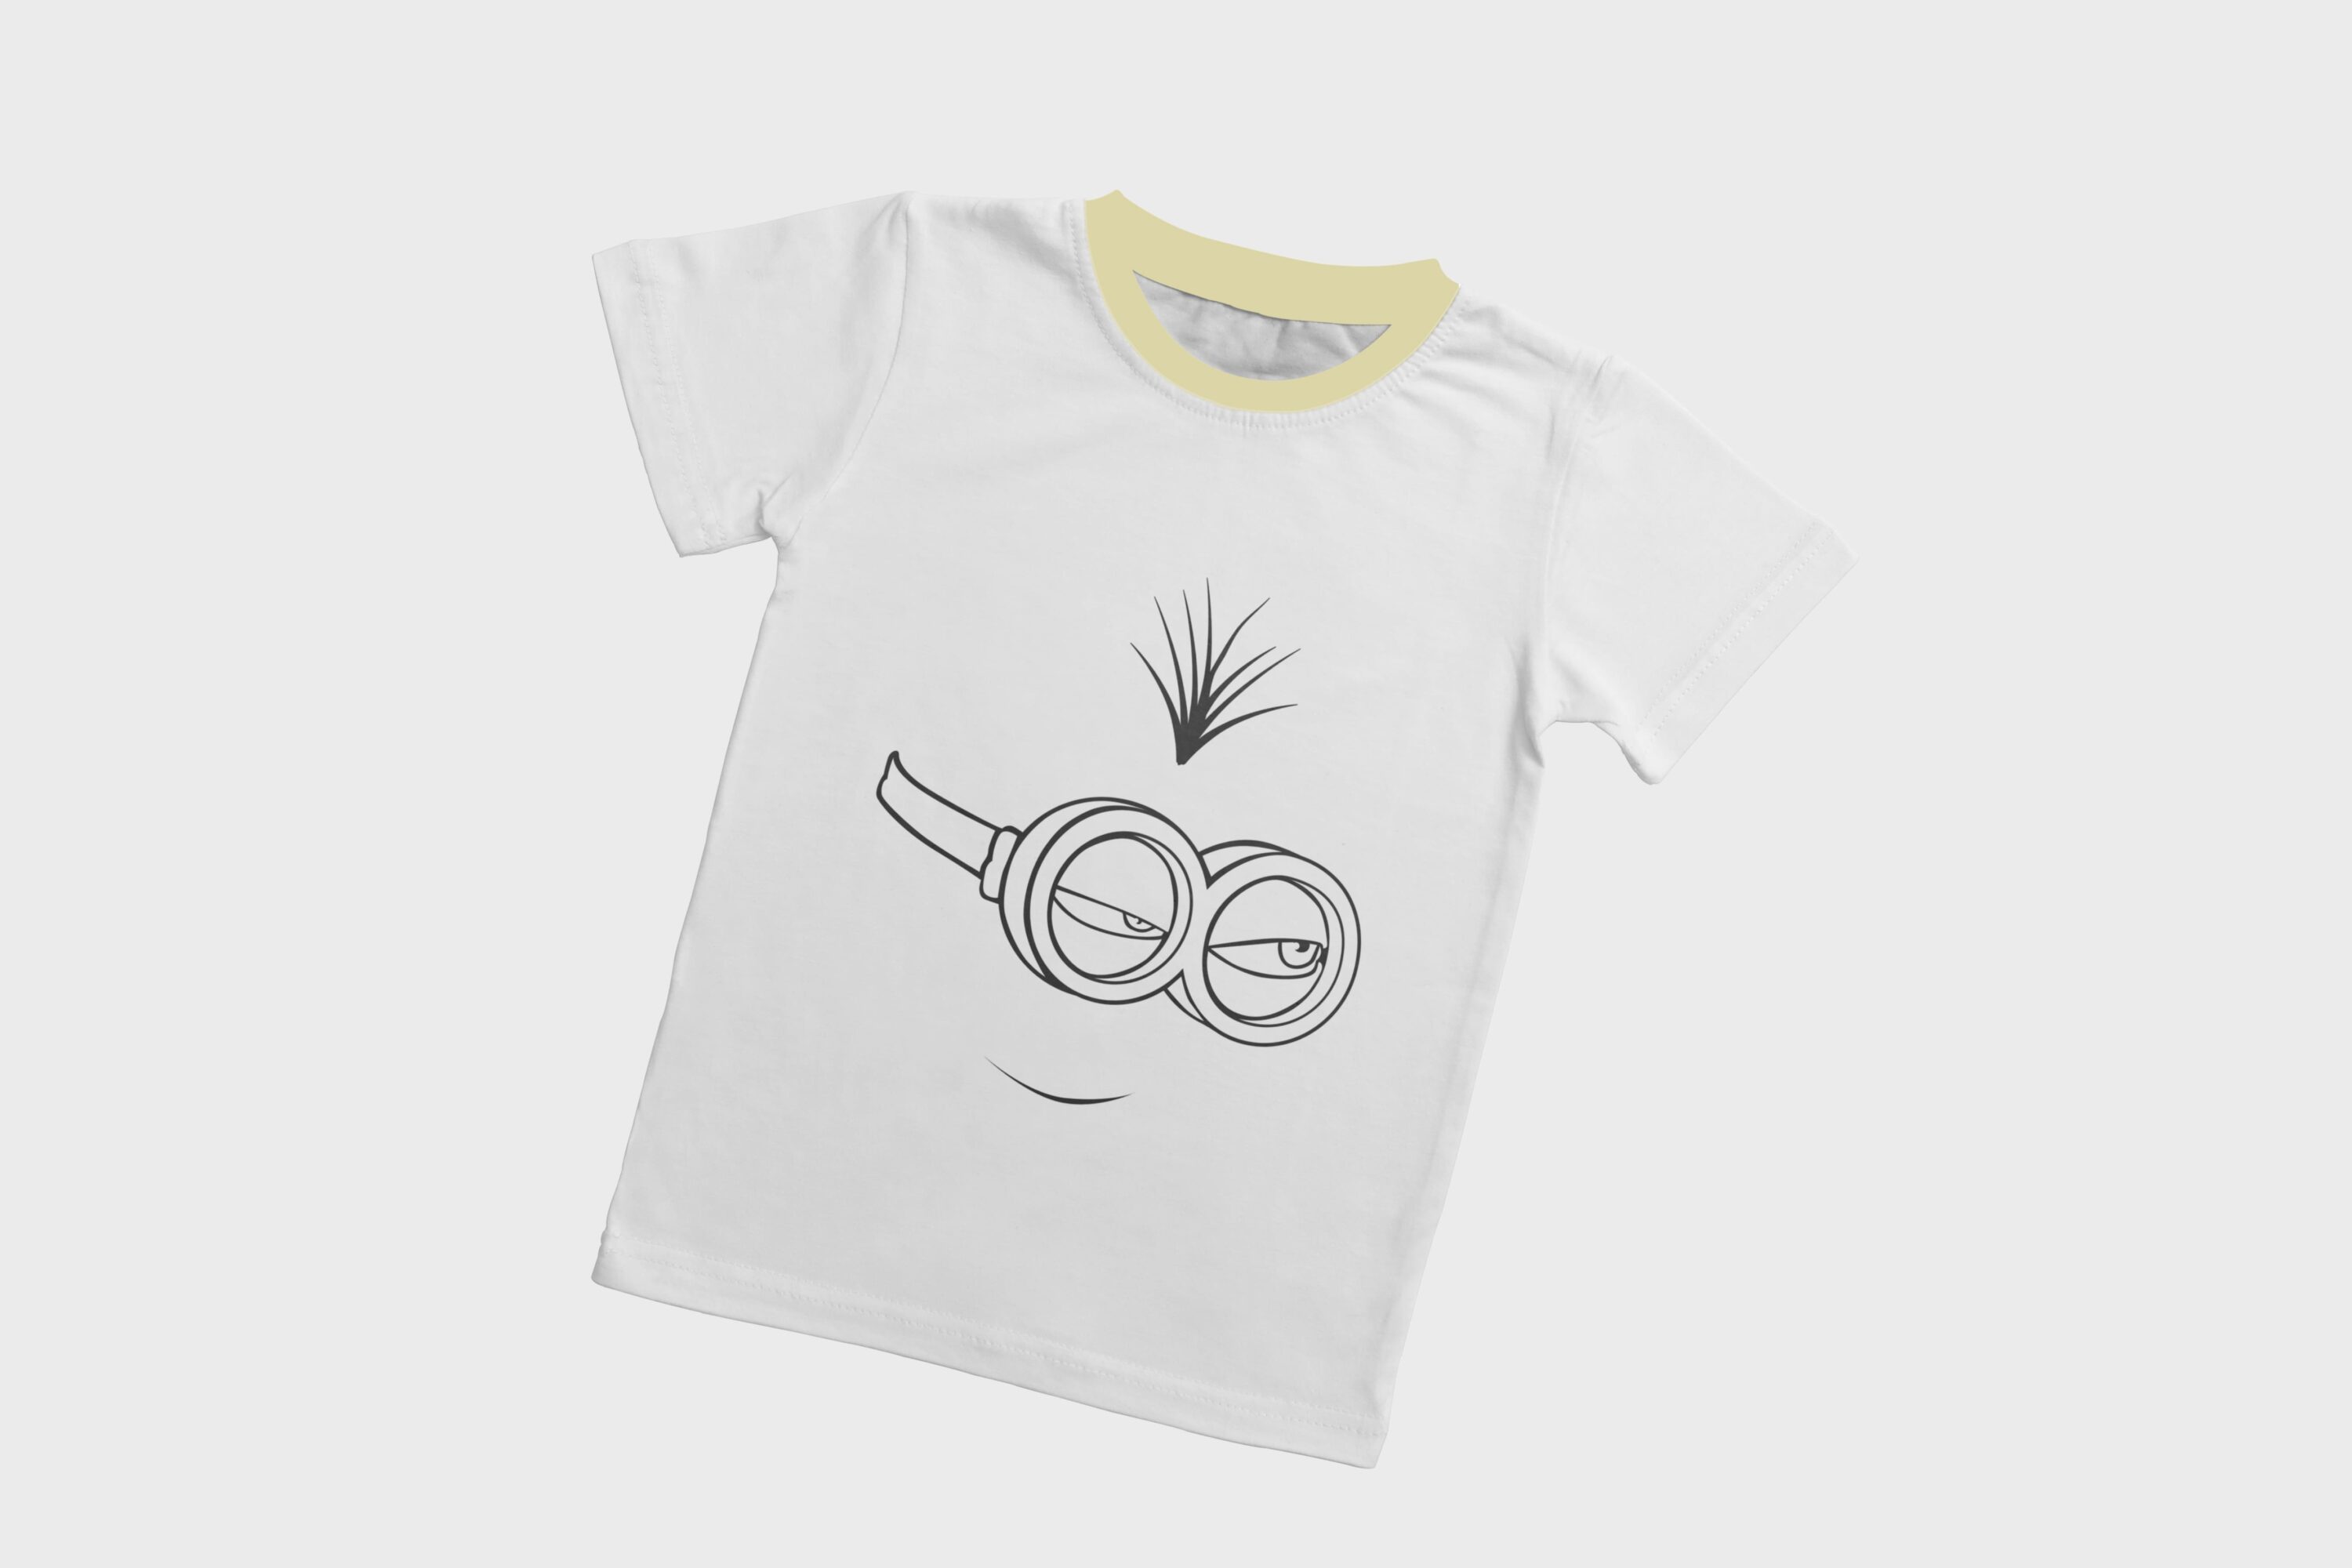 A white T-shirt with a dirty yellow collar and a silhouette face of a grinning minion.